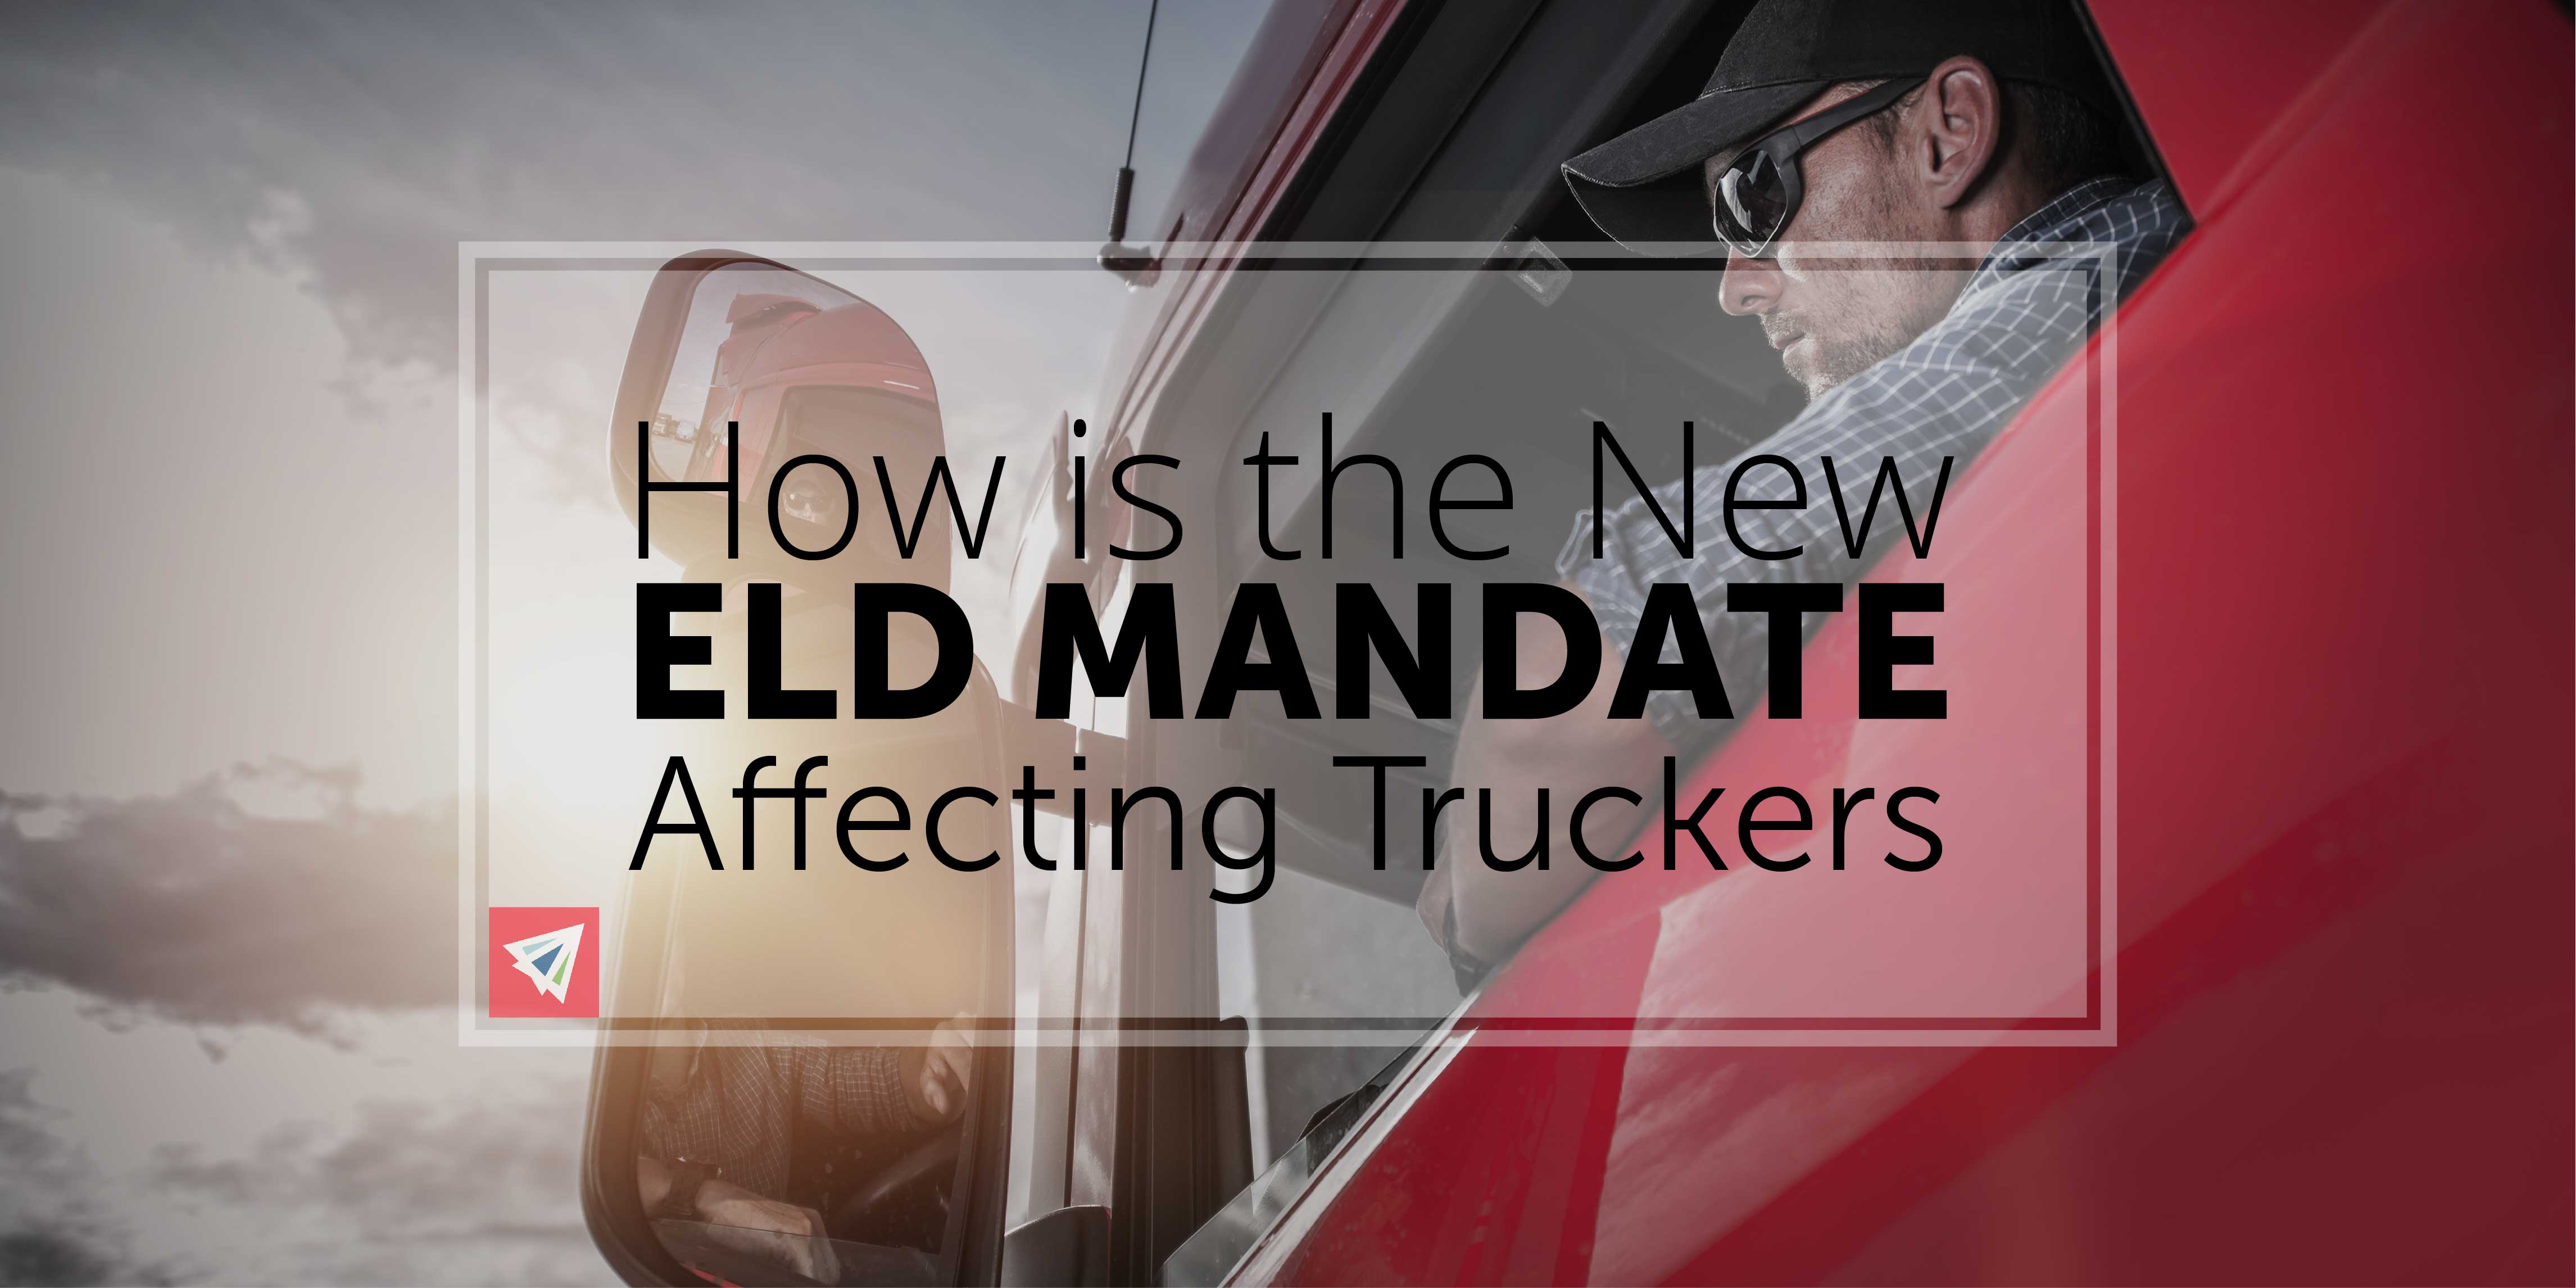 How is the New ELD Mandate Affecting Truckers